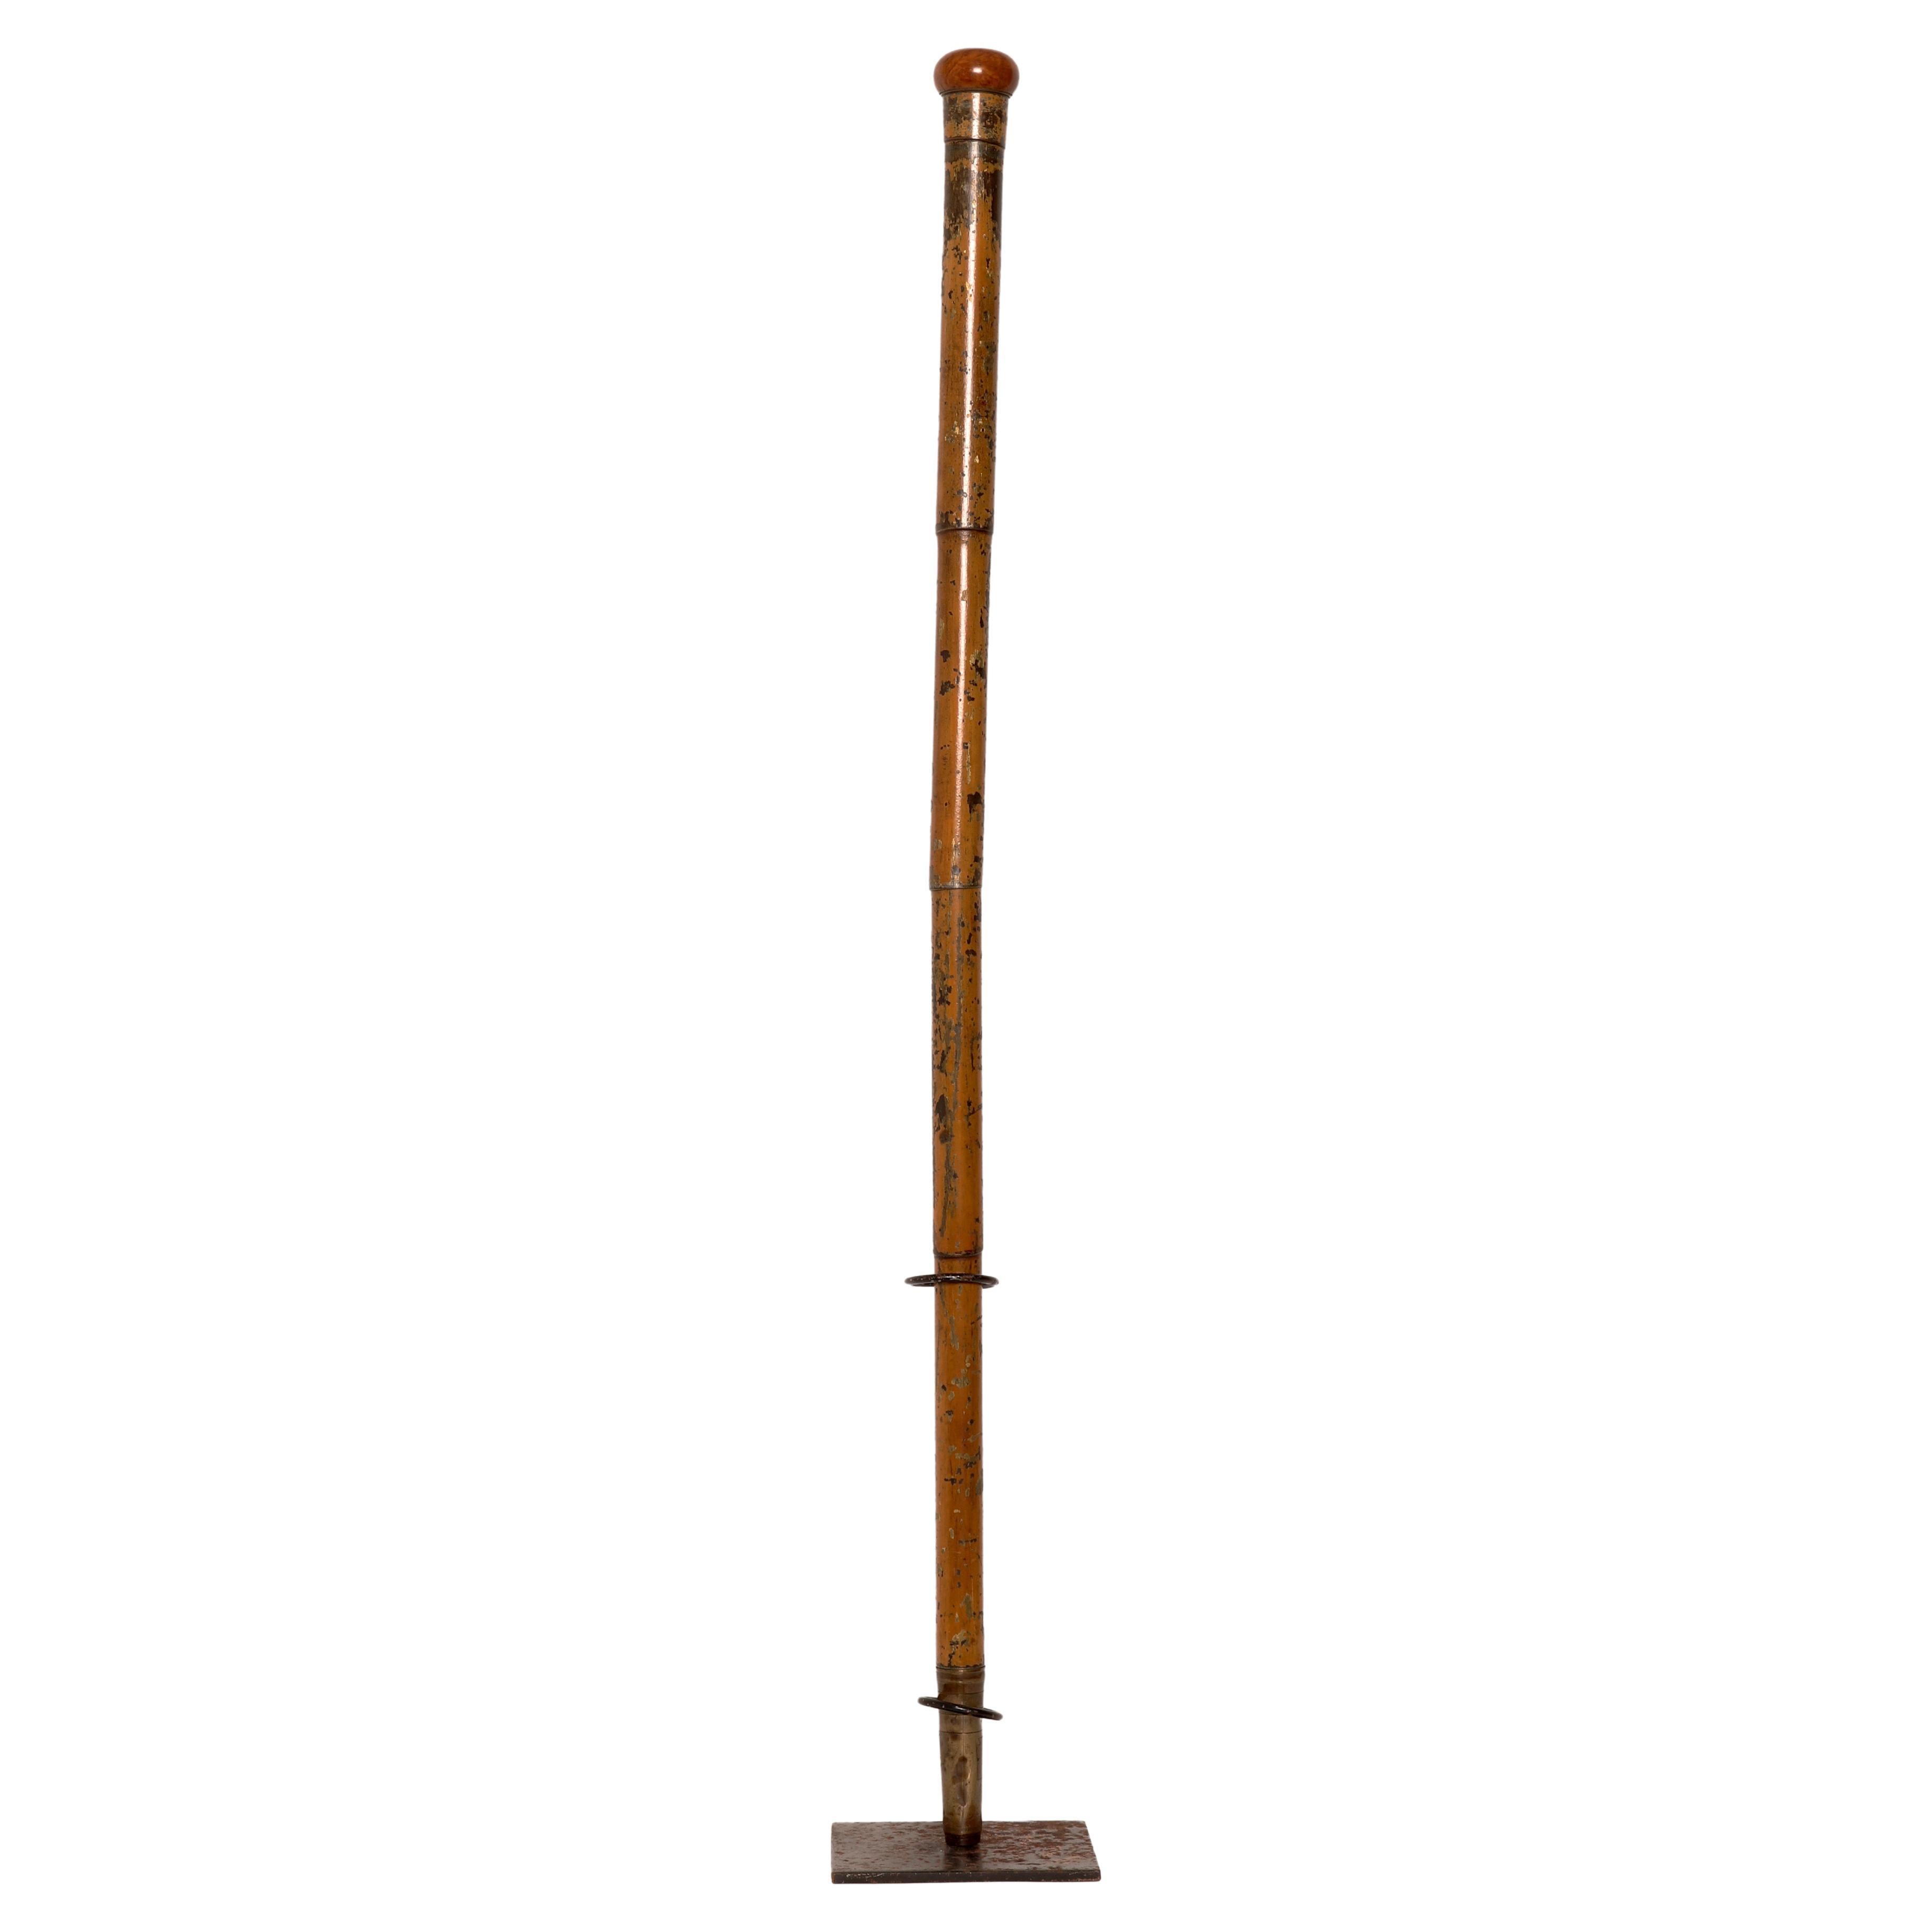 Gadget-System stick. The tip is made of iron and brass, high and decorated by a series of thin circles. The shaft is made entirely of painted brass and constructed to emulate a bamboo cane. The painting of the entire barrel completed everything. The